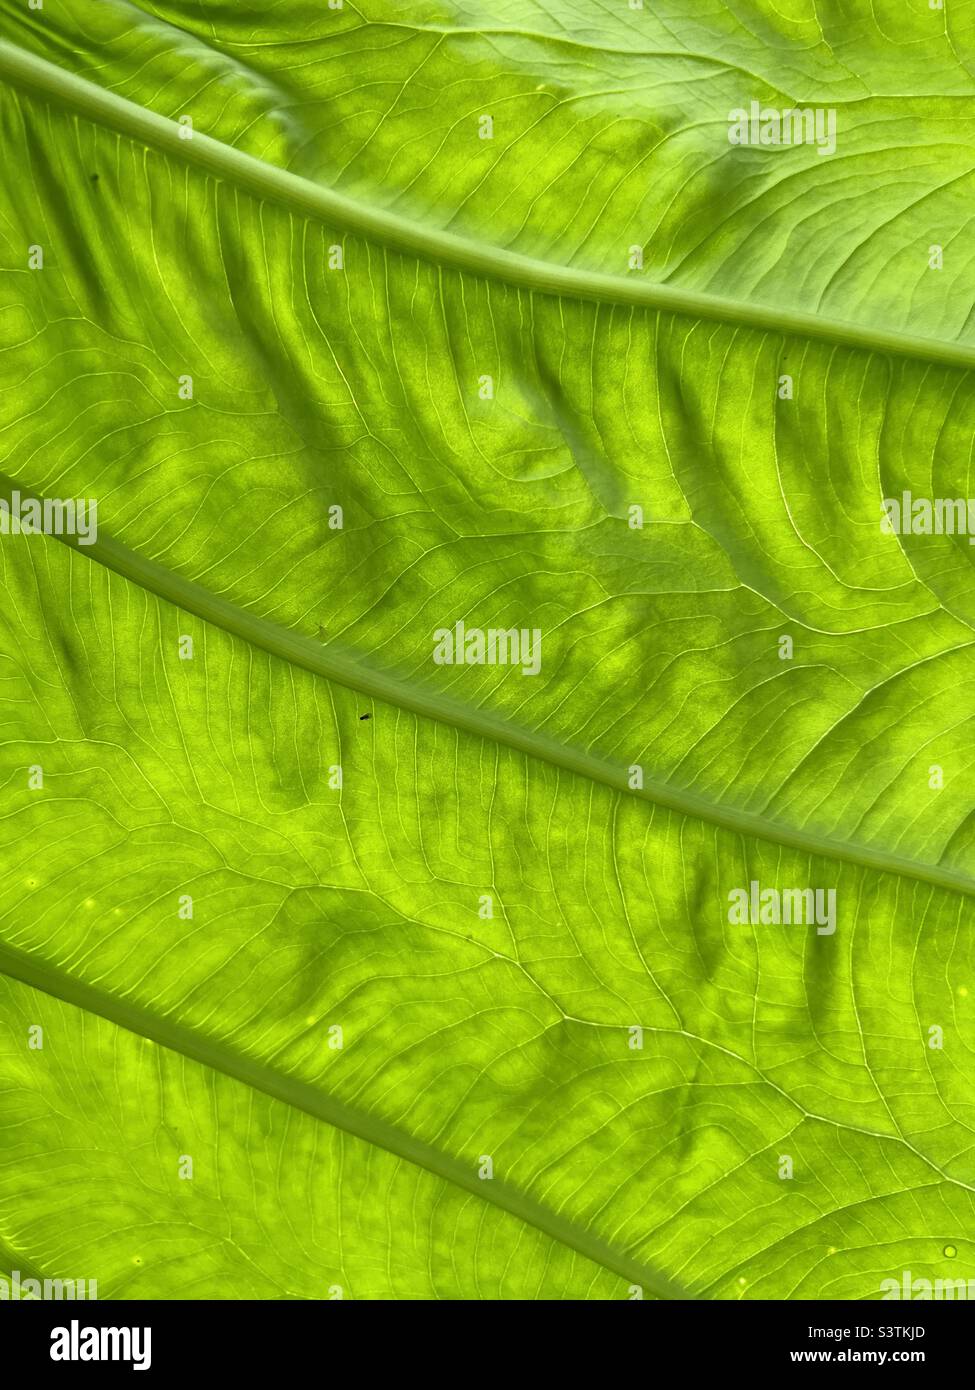 Abstract background of bright green toro leaf Stock Photo